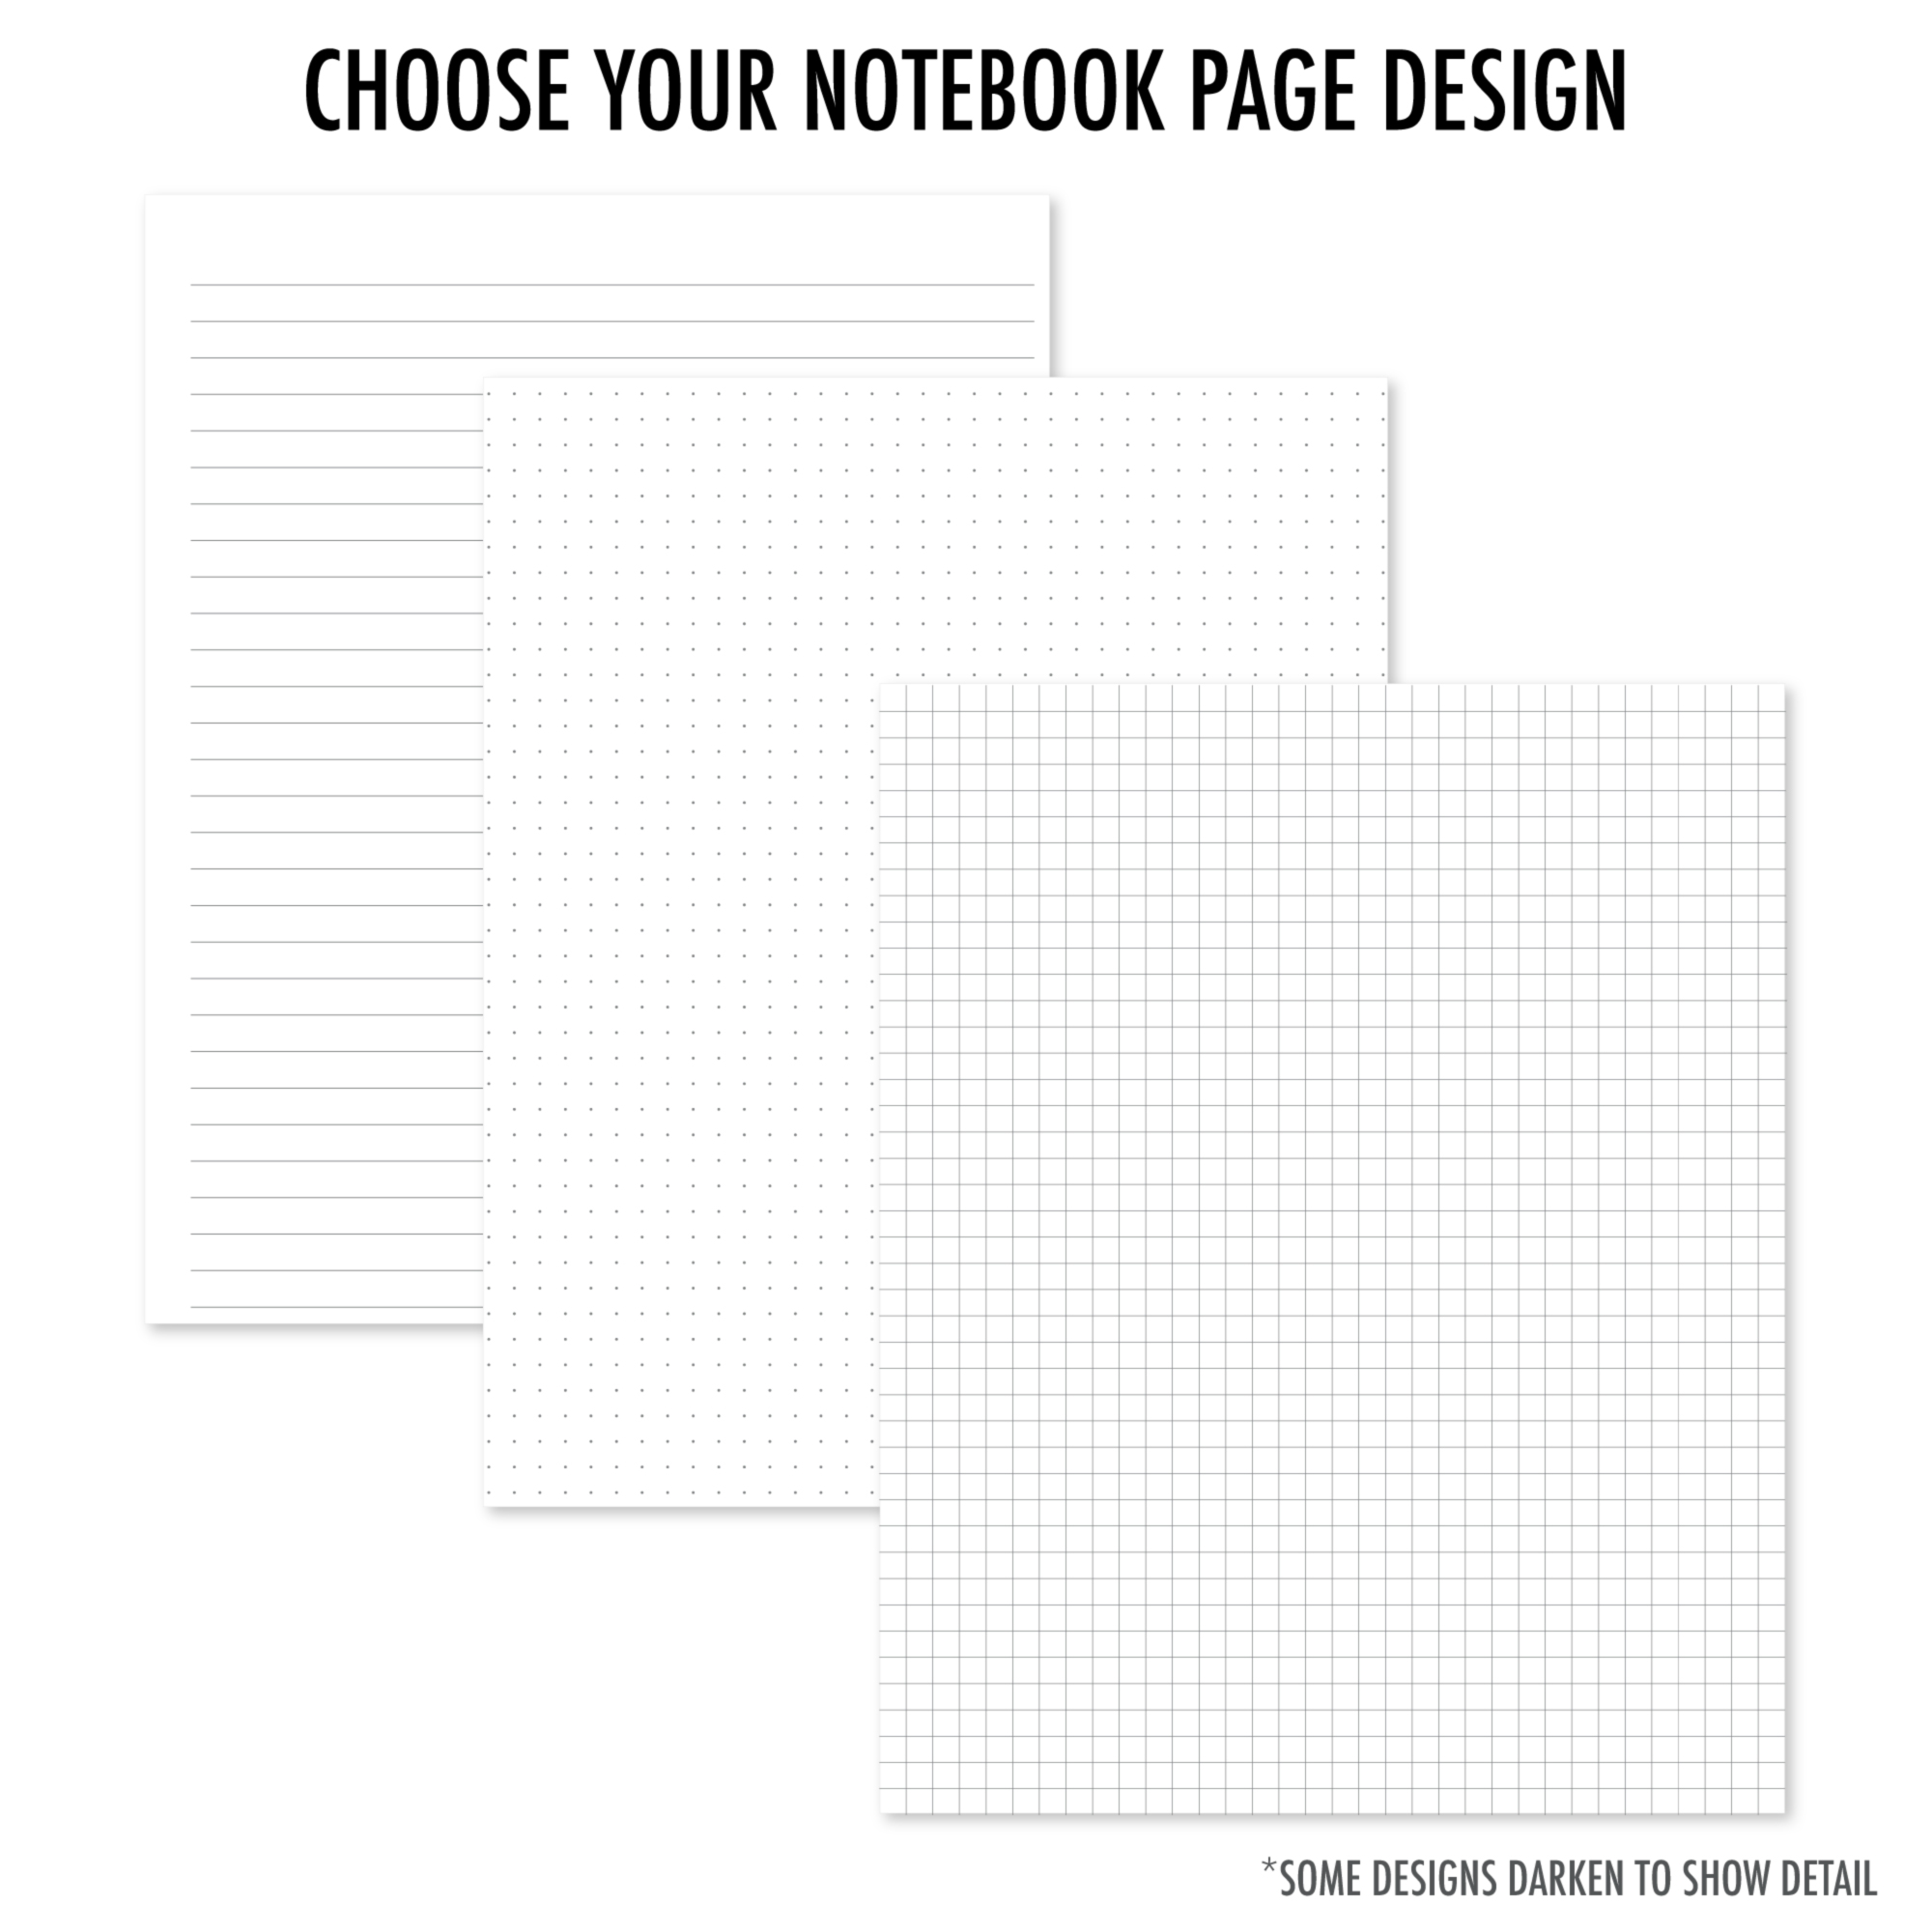 Notebook category picture